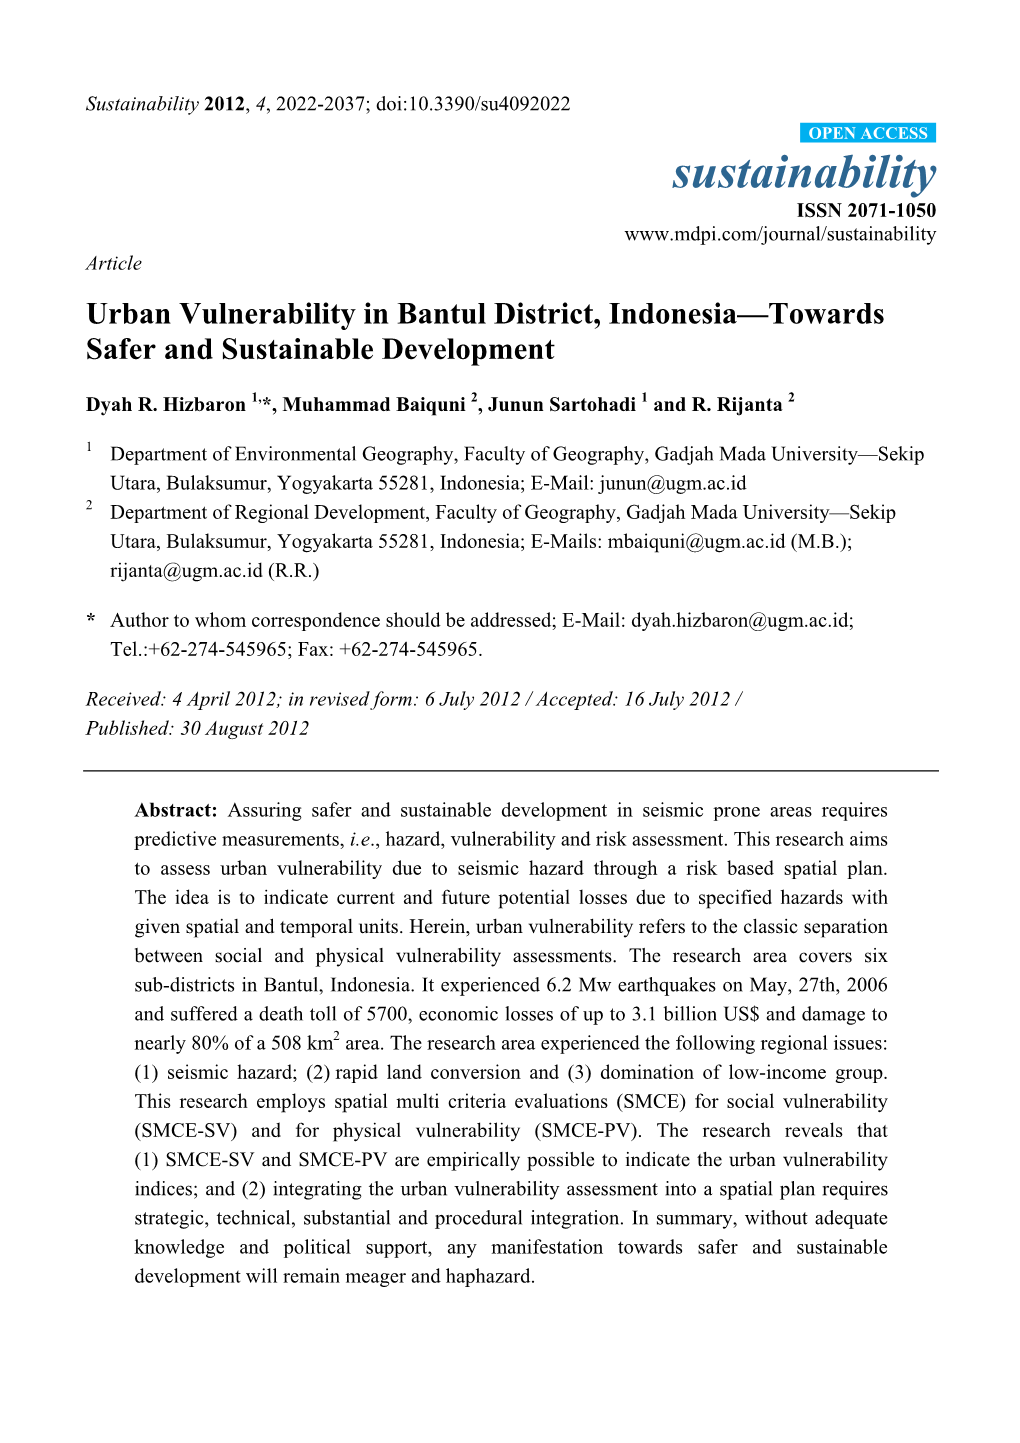 Urban Vulnerability in Bantul District, Indonesia—Towards Safer and Sustainable Development